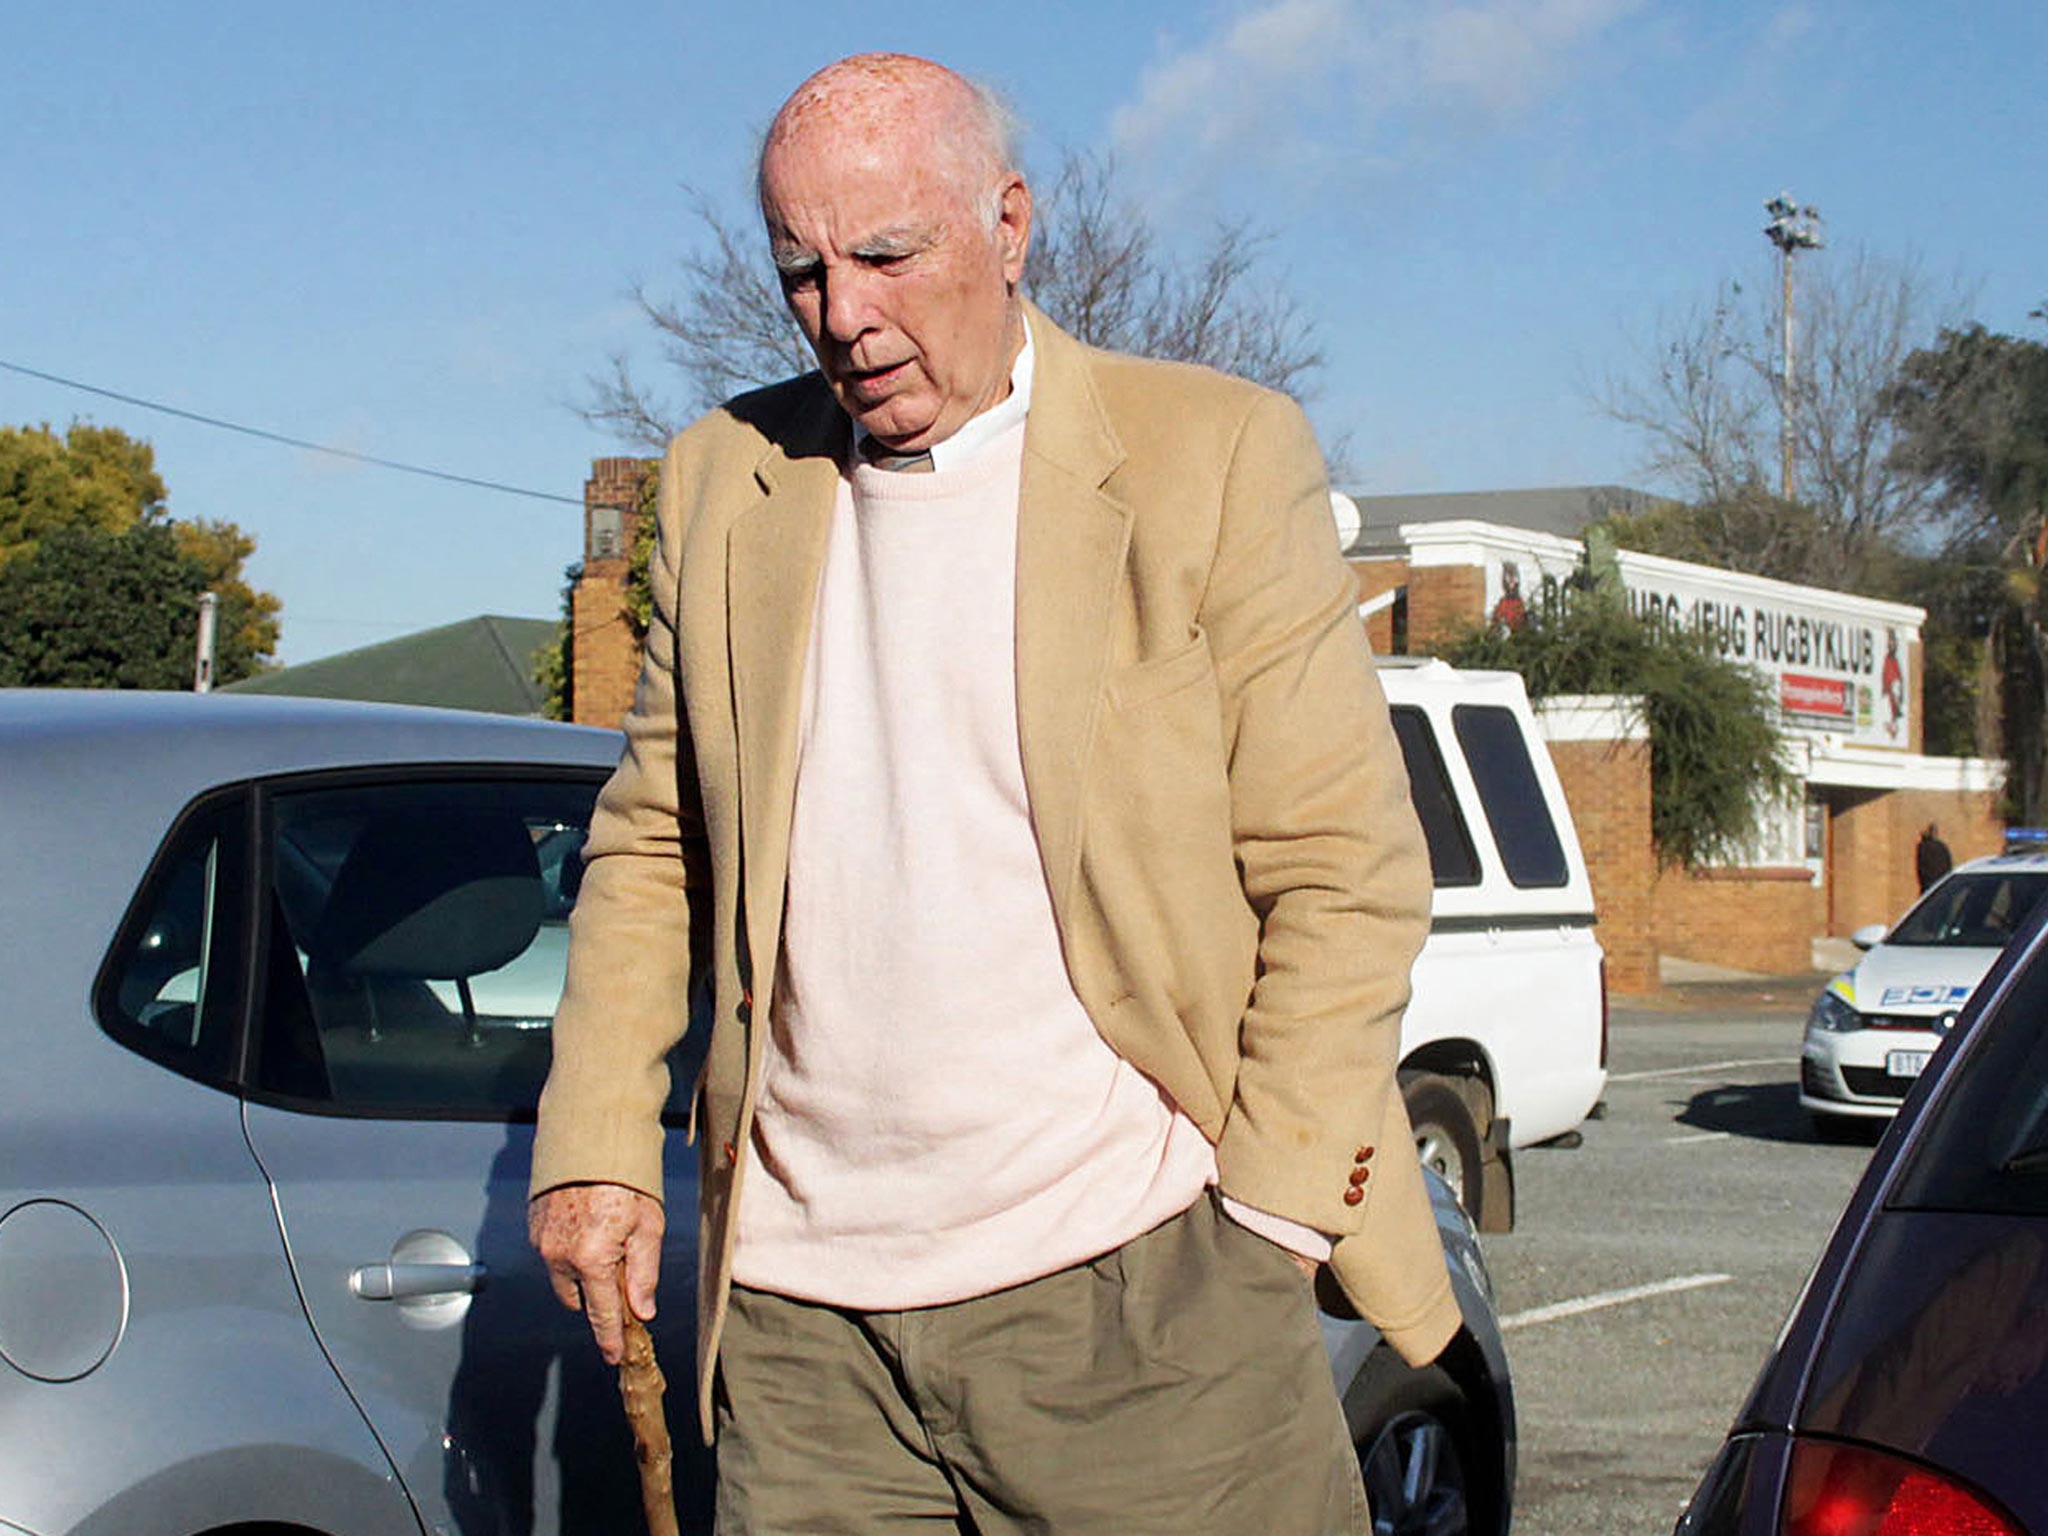 Bob Hewitt, the former Grand Slam doubles champion and one-time tennis hall of famer, is seen outside the magistrates court in Boksburg, South Africa